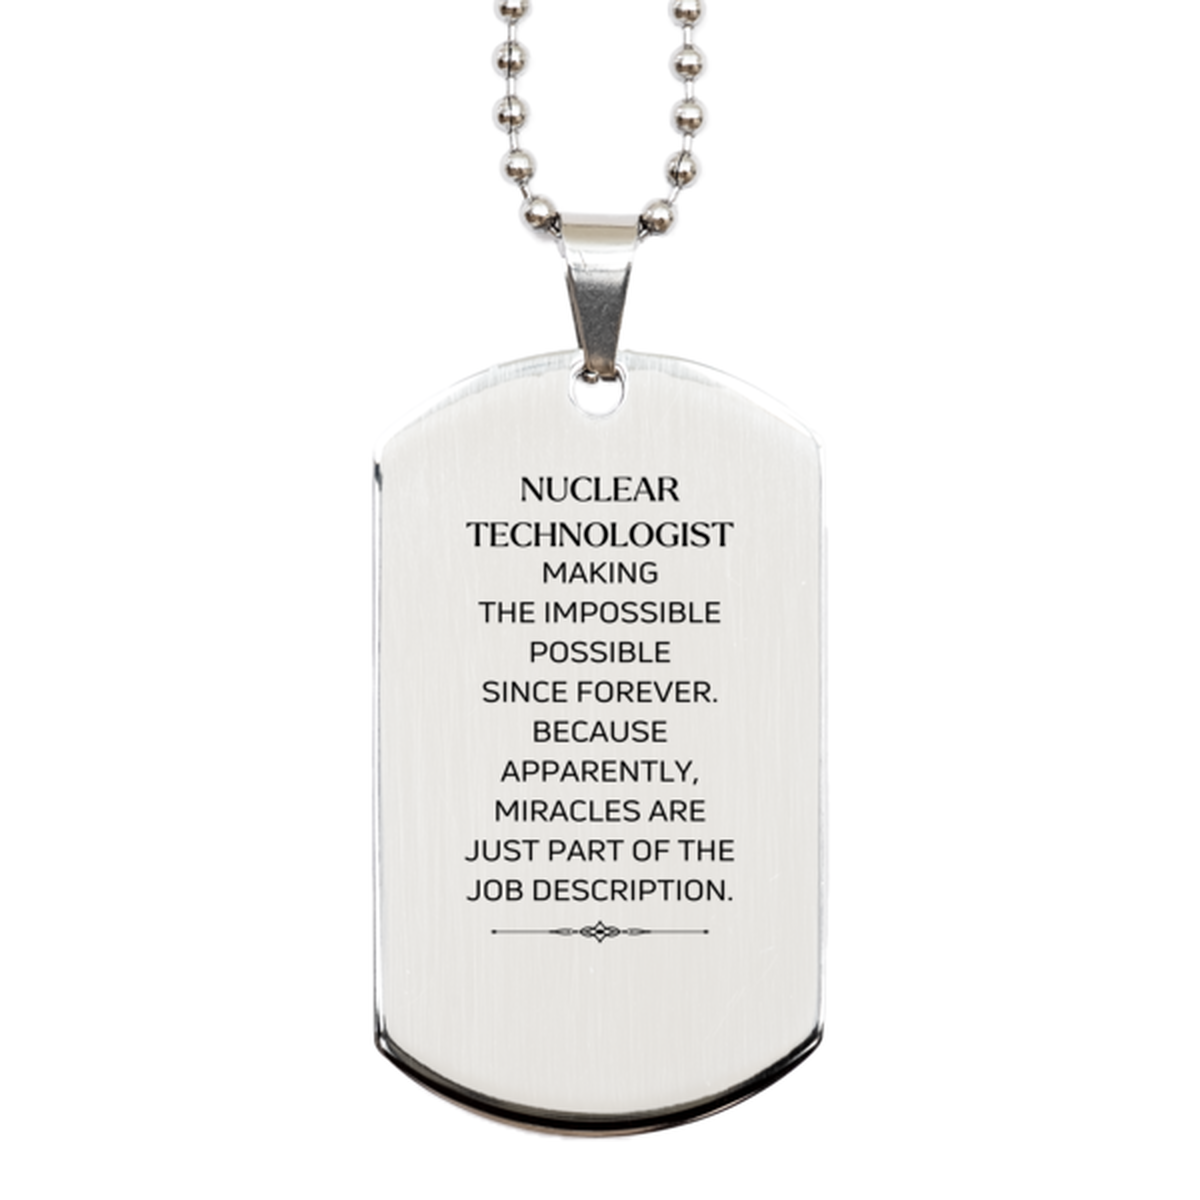 Funny Nuclear Technologist Gifts, Miracles are just part of the job description, Inspirational Birthday Silver Dog Tag For Nuclear Technologist, Men, Women, Coworkers, Friends, Boss